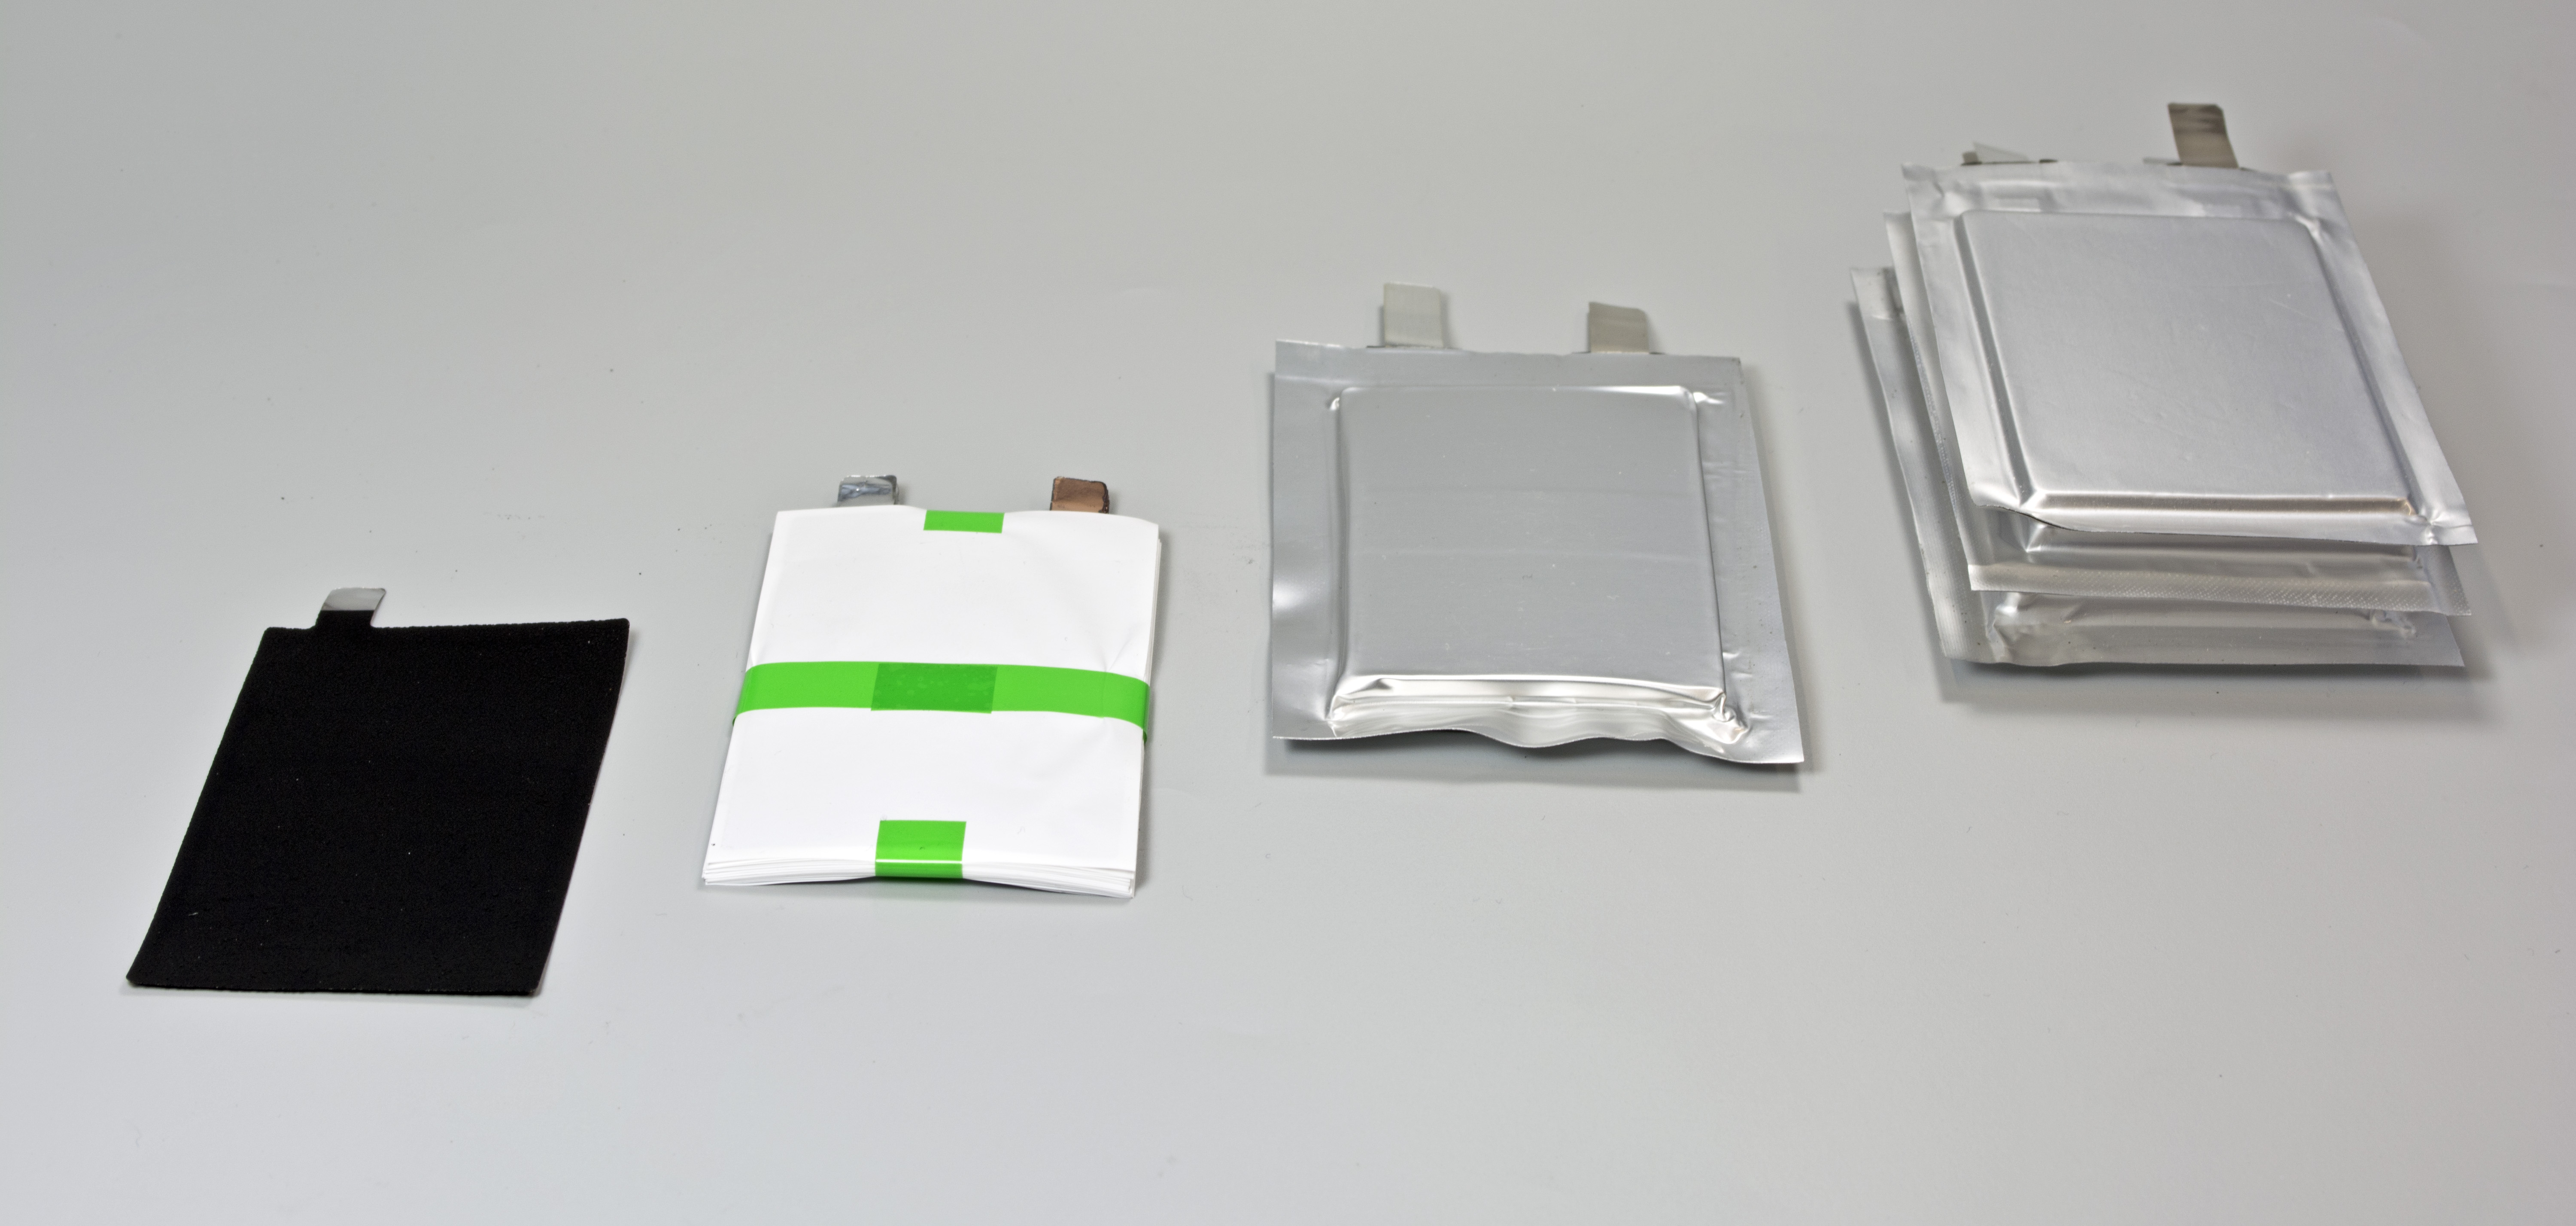 Pouch cell construction in three stages: They are assembled by stacking individual layers of electrodes and separators. This enables industry-oriented material tests for a wide variety of cell systems.